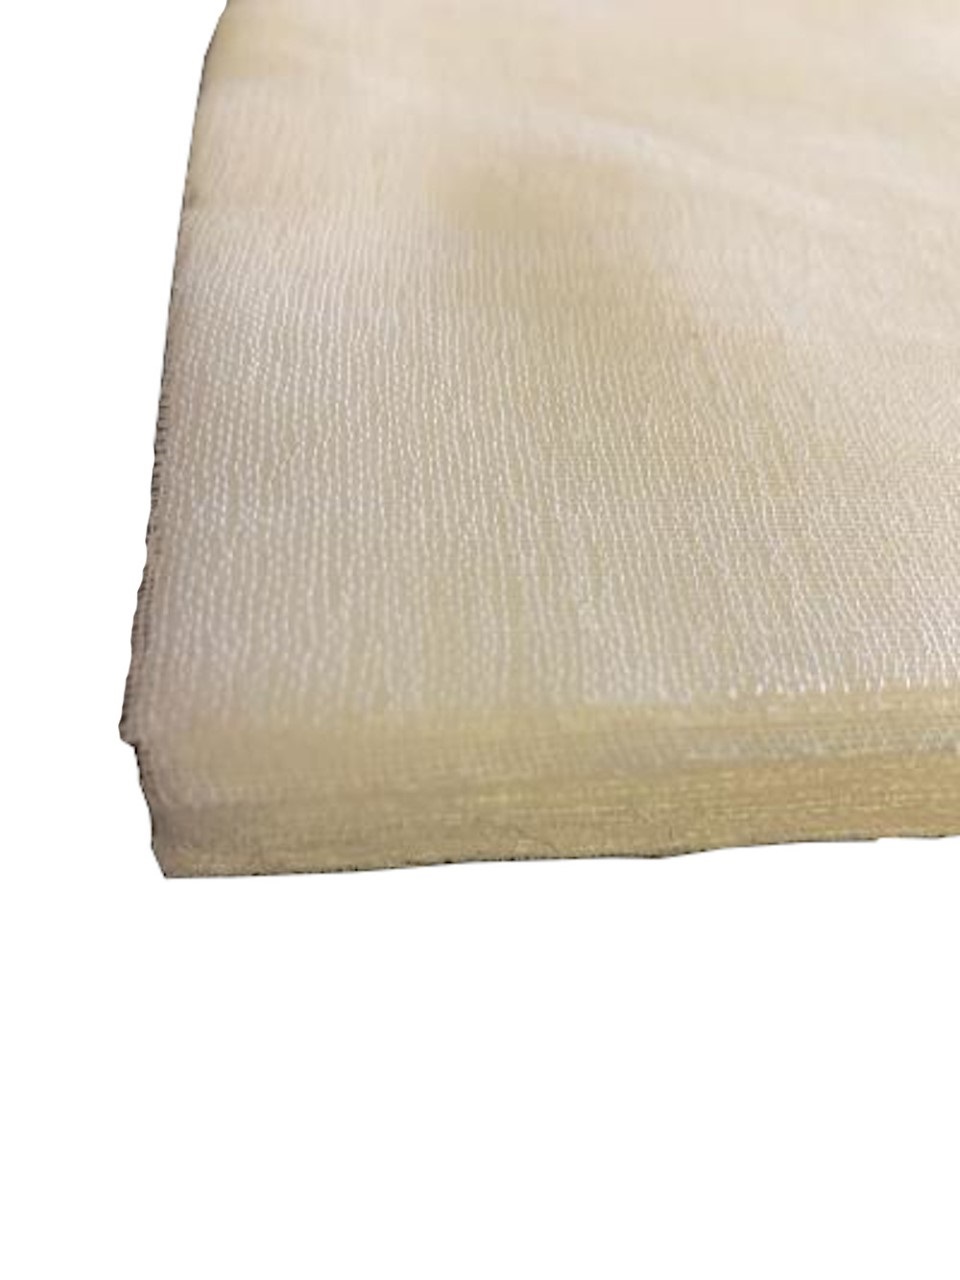 Grade 90 White Cheesecloth 18" x 18" Squares (100 Pack)